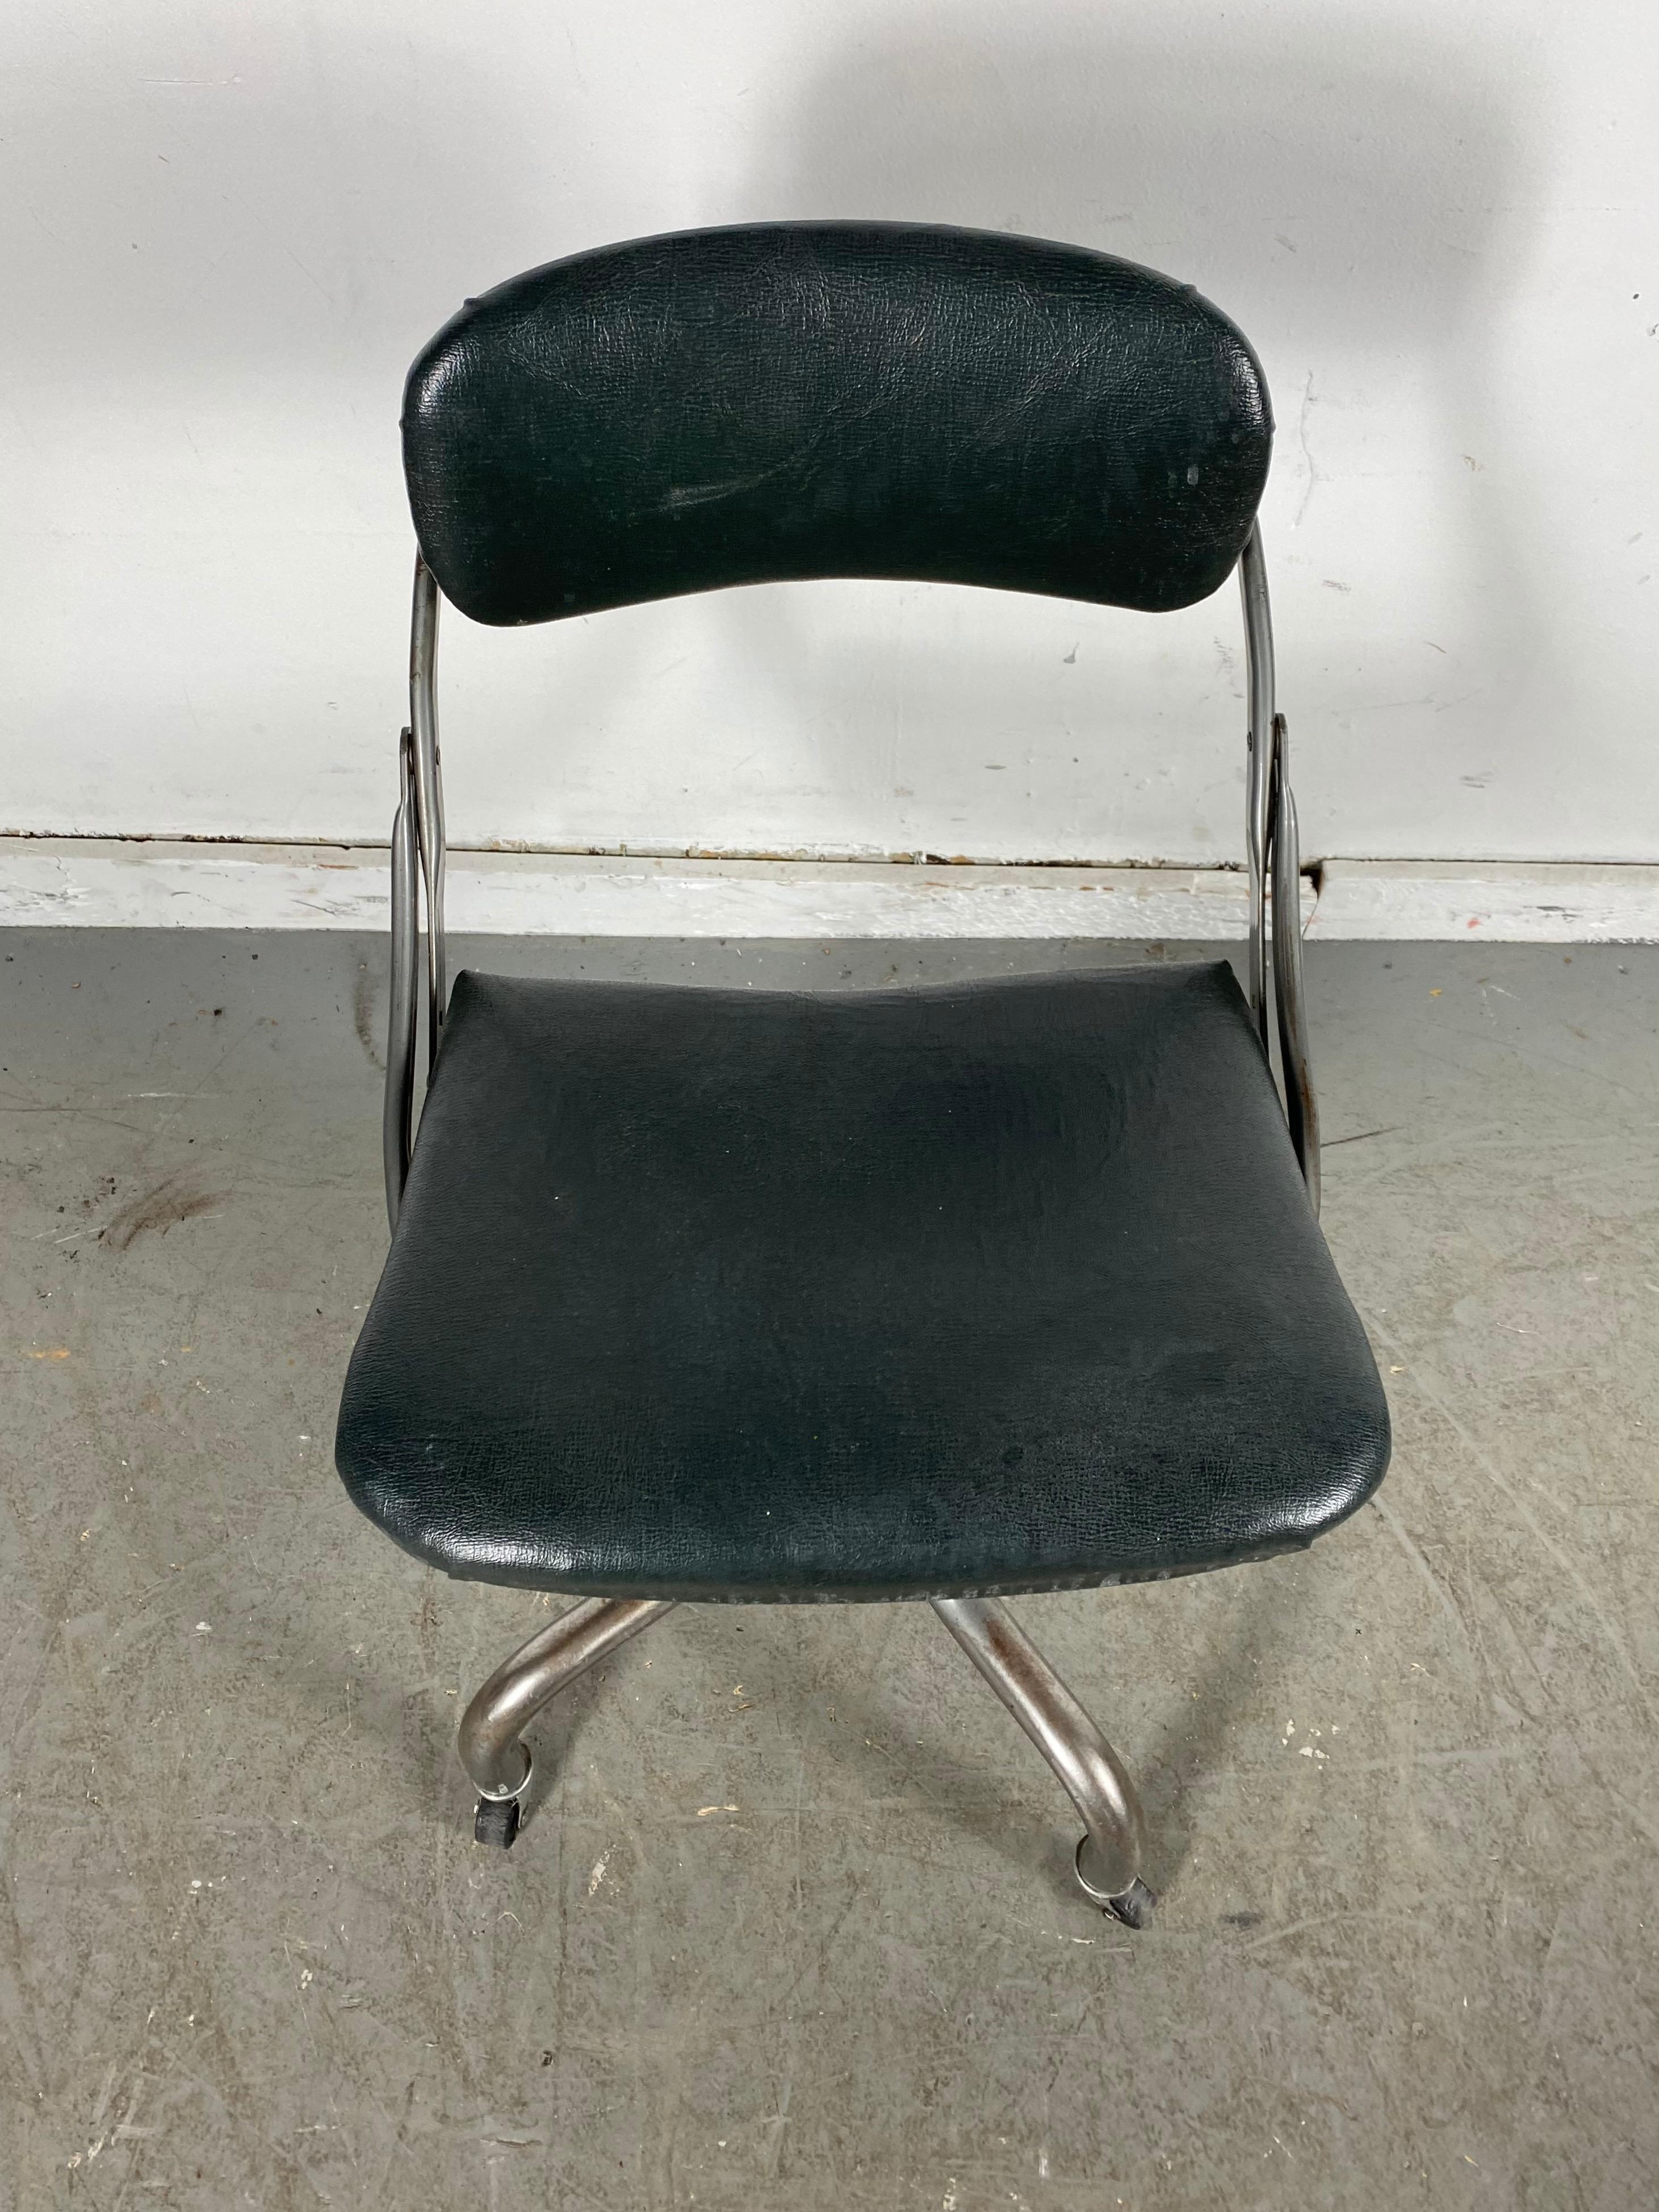 Metal 1930s Industrial Swivel Task / Desk Chair manufactured by Do/ More, Art Deco